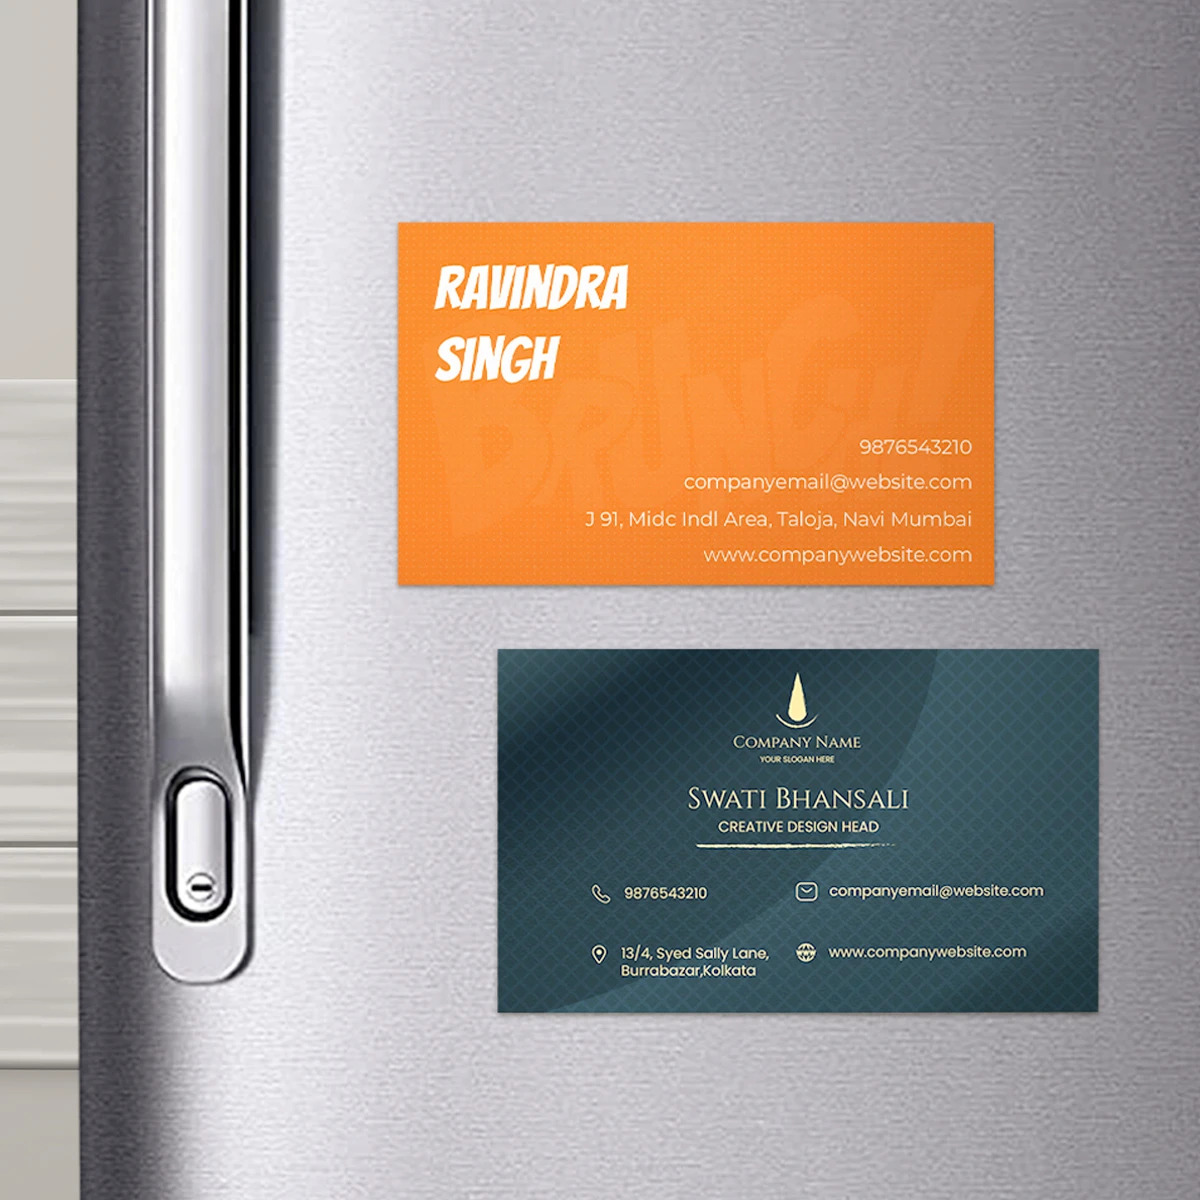 Printed Visiting Card Online: Importance in Business Networking